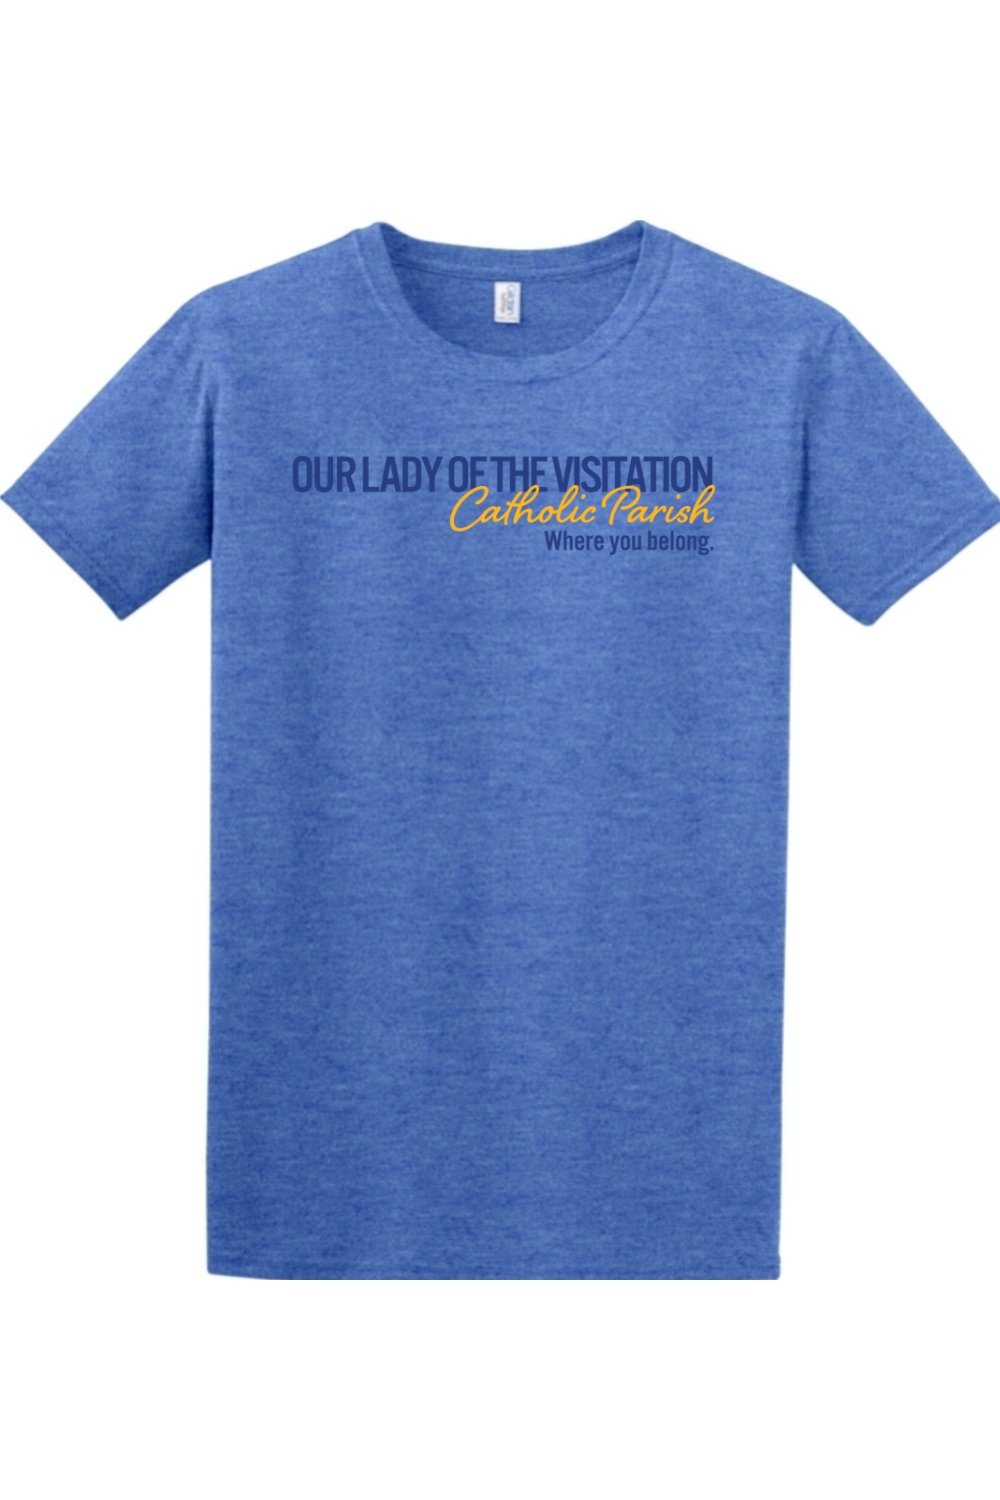 Our Lady of the Visitation Block T-Shirt